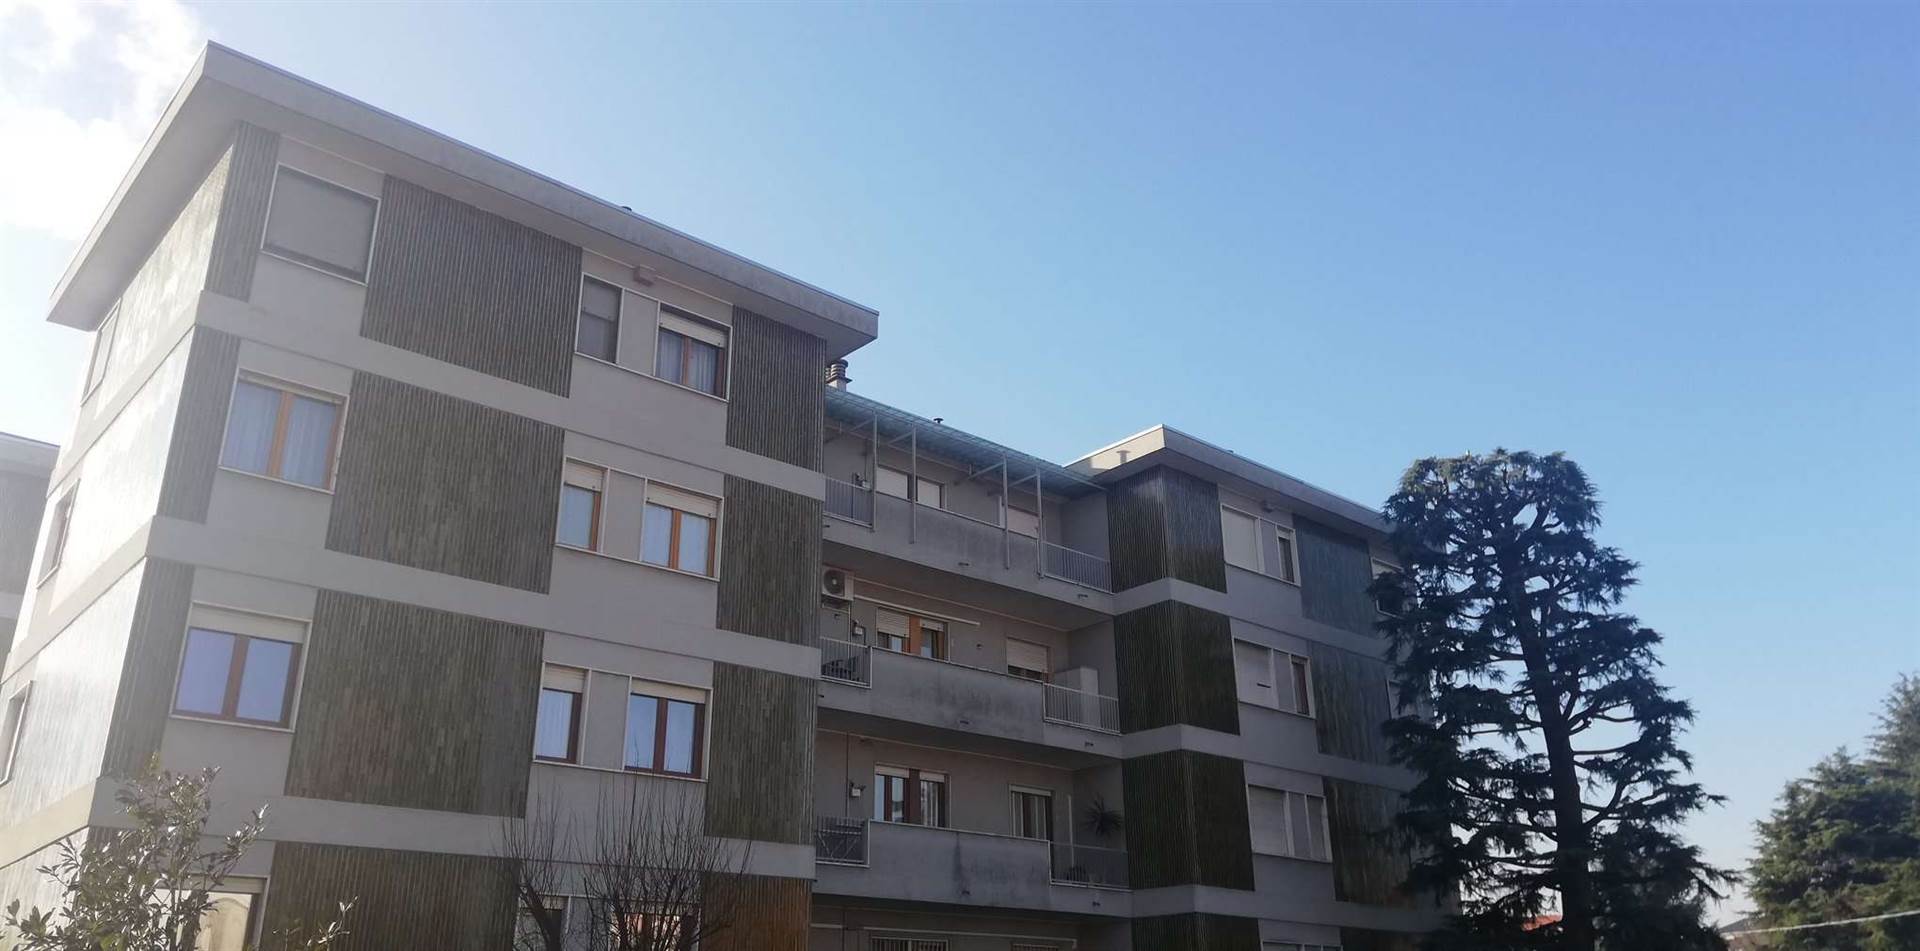 PISCINA, SARONNO, Apartment for rent of 70 Sq. mt., Good condition, Heating Centralized, Energetic class: E, placed at 4° on 4, composed by: 2 Rooms, 